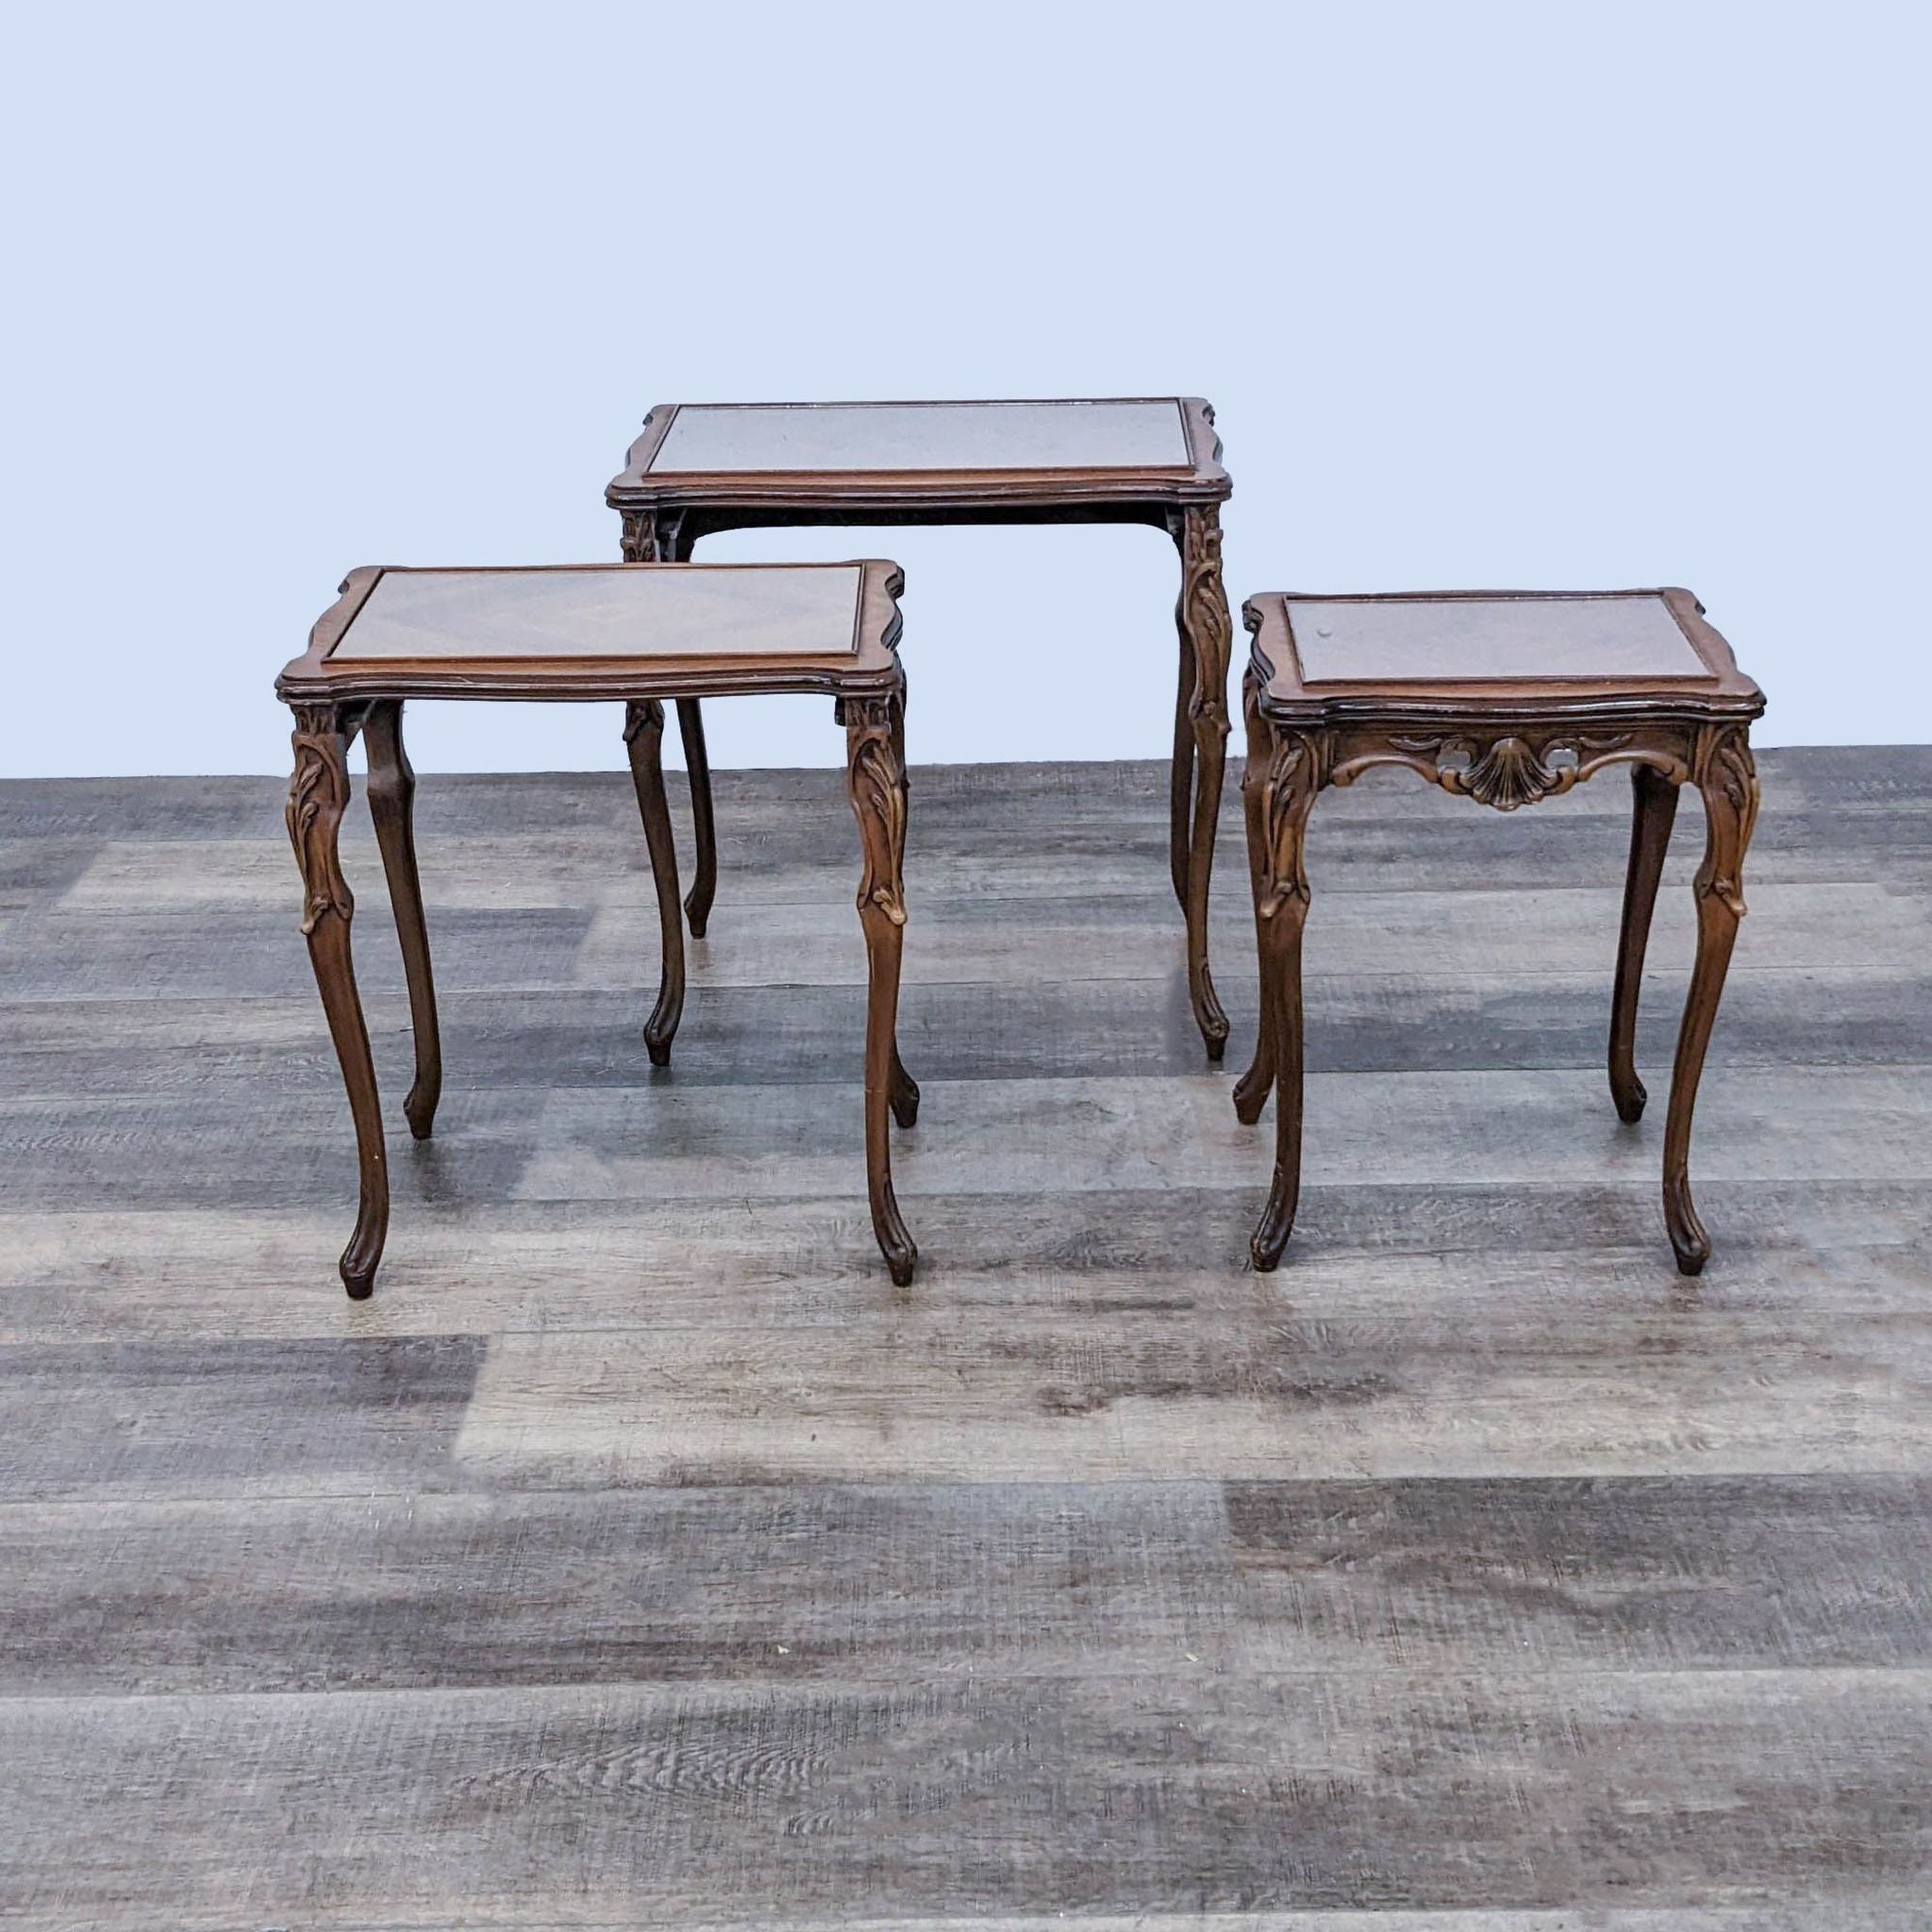 Trio of carved Reperch end tables featuring glass tops and curved legs, on a patterned floor.